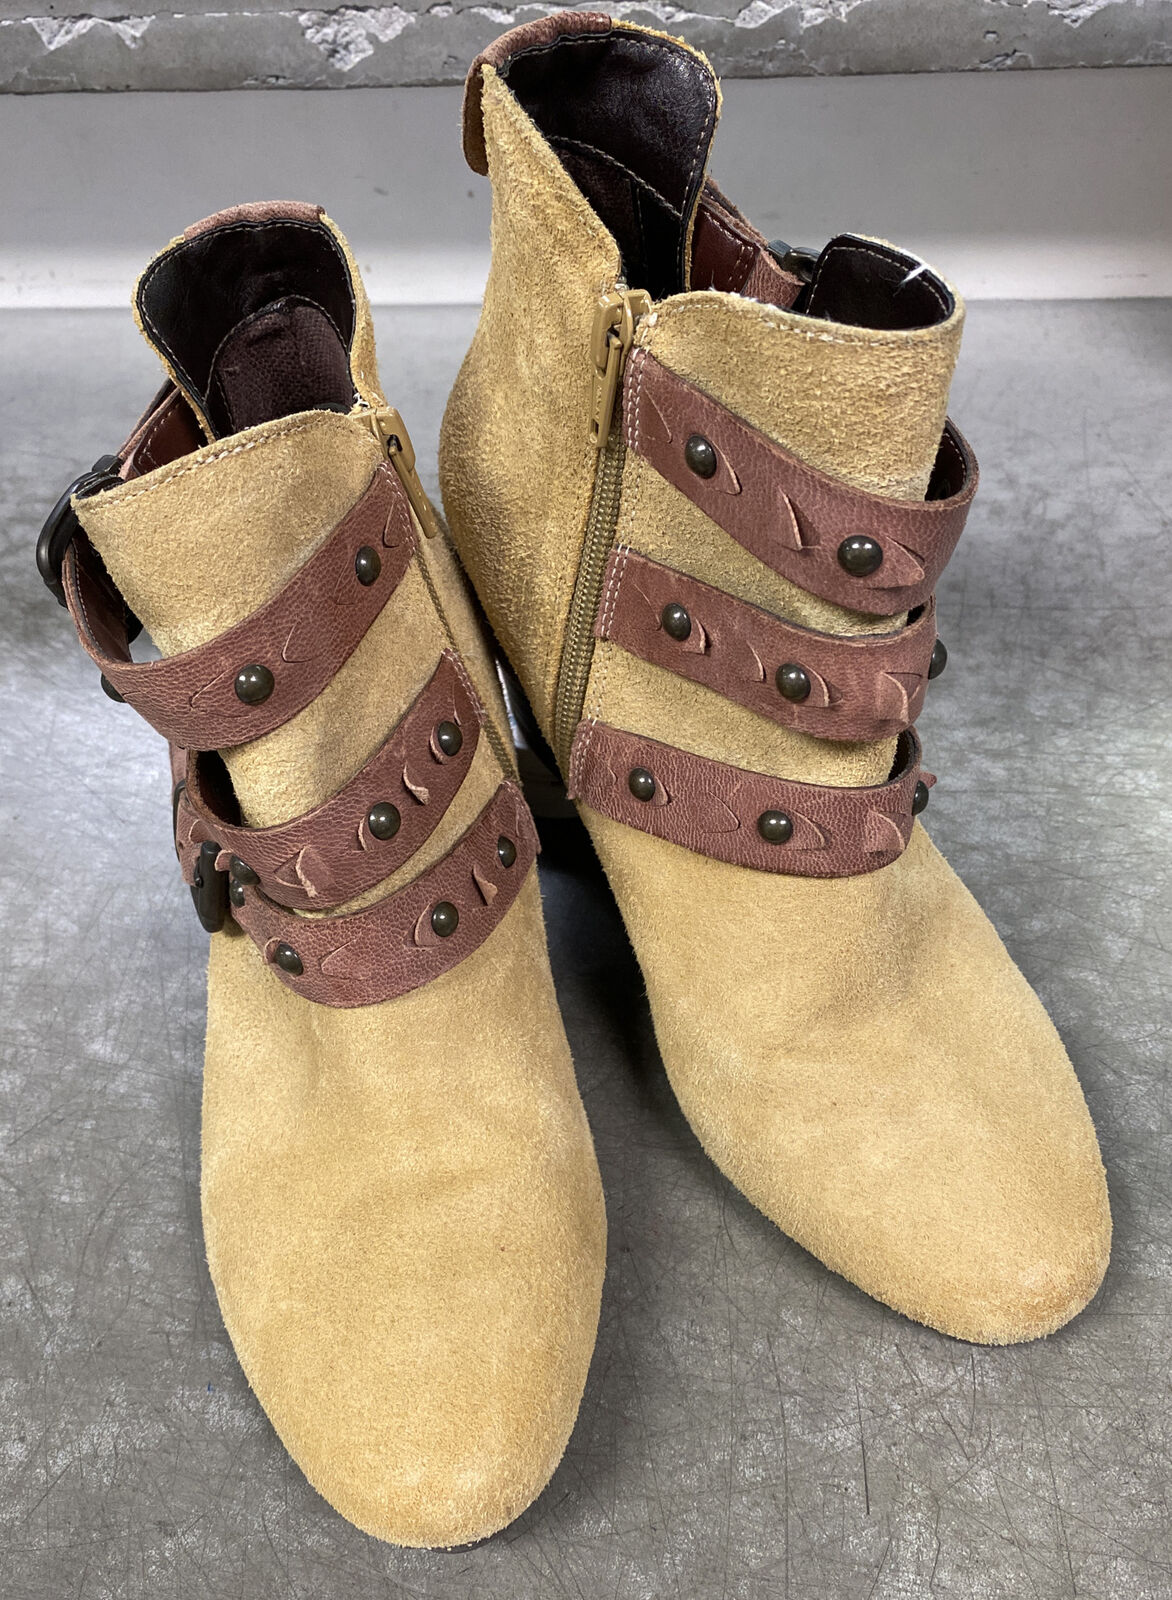 Anthropologie OTBT Valley View Booties Size 7 Tan Suede￼ Leather